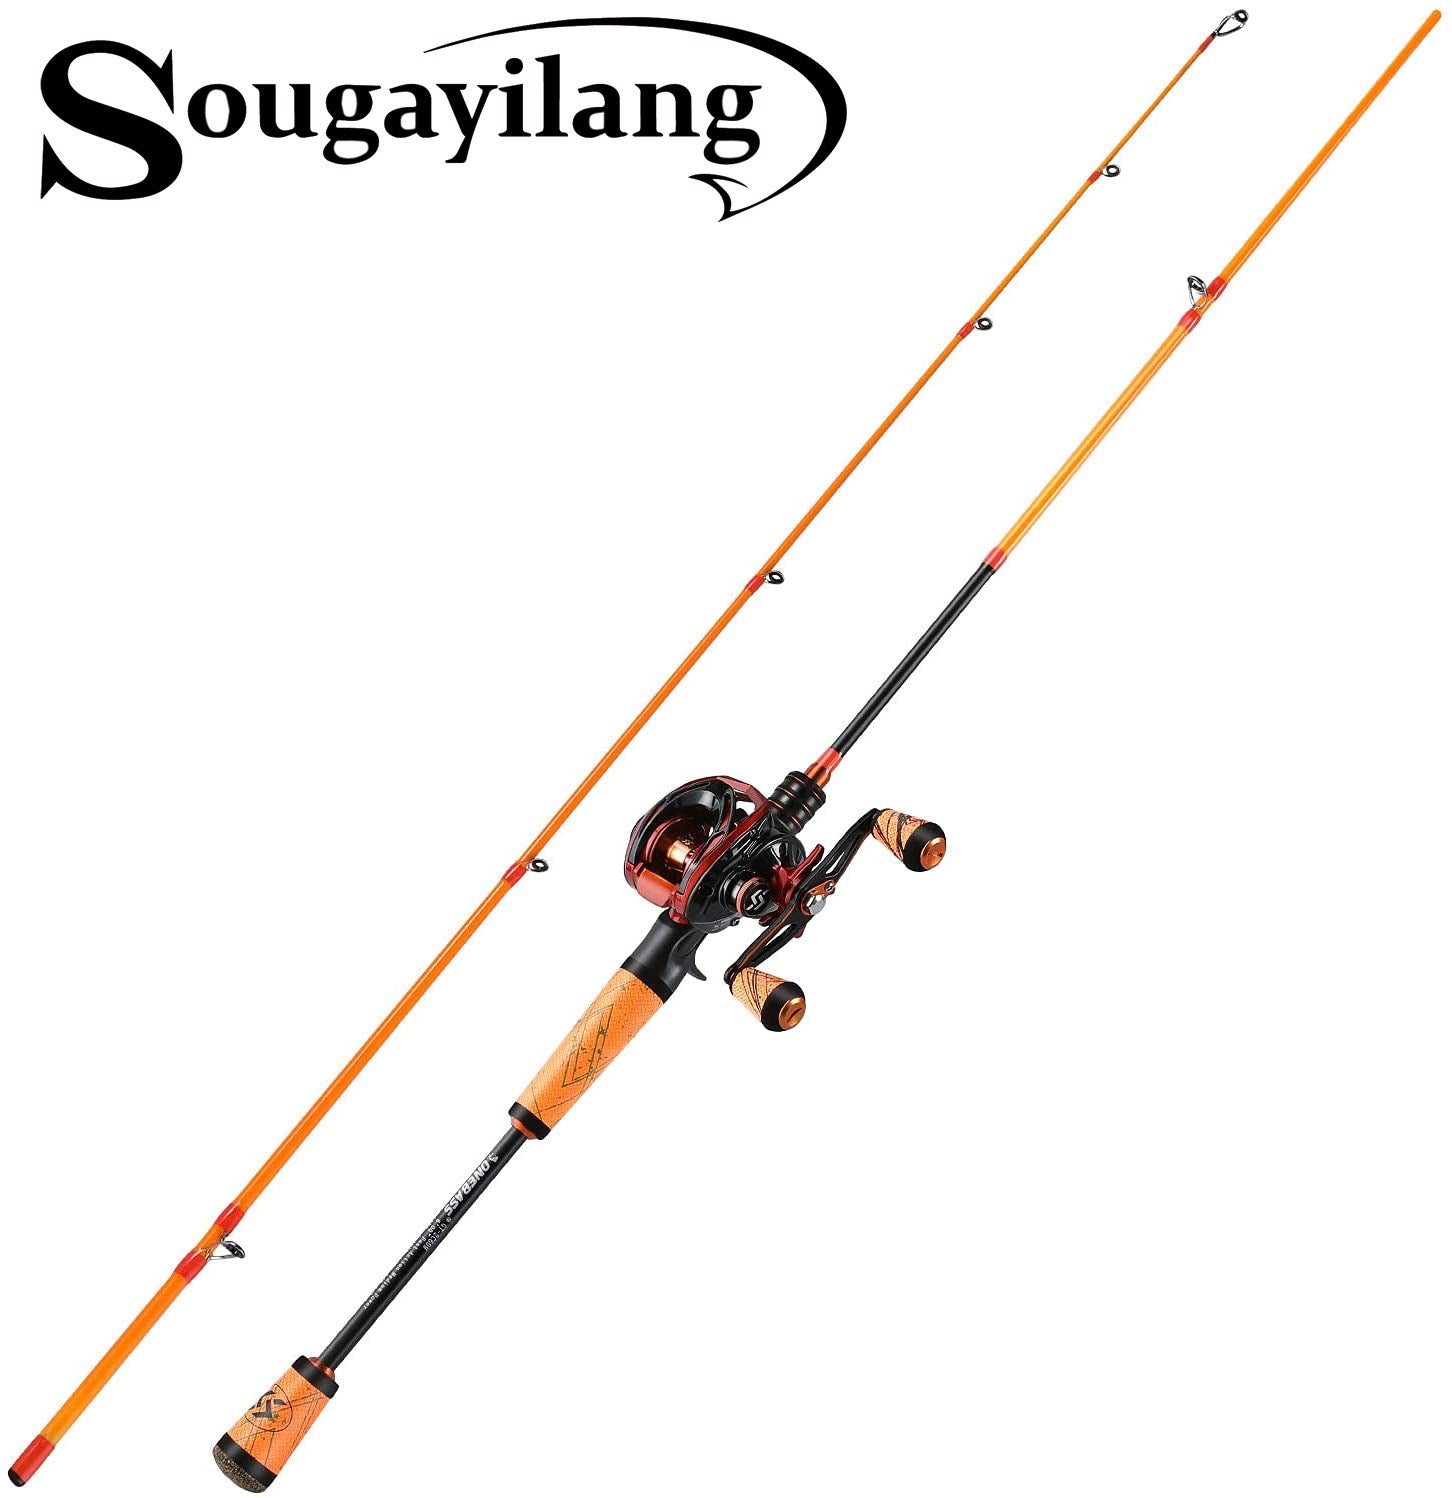  One Bass Fishing Pole 24 Ton Carbon Fiber Casting and